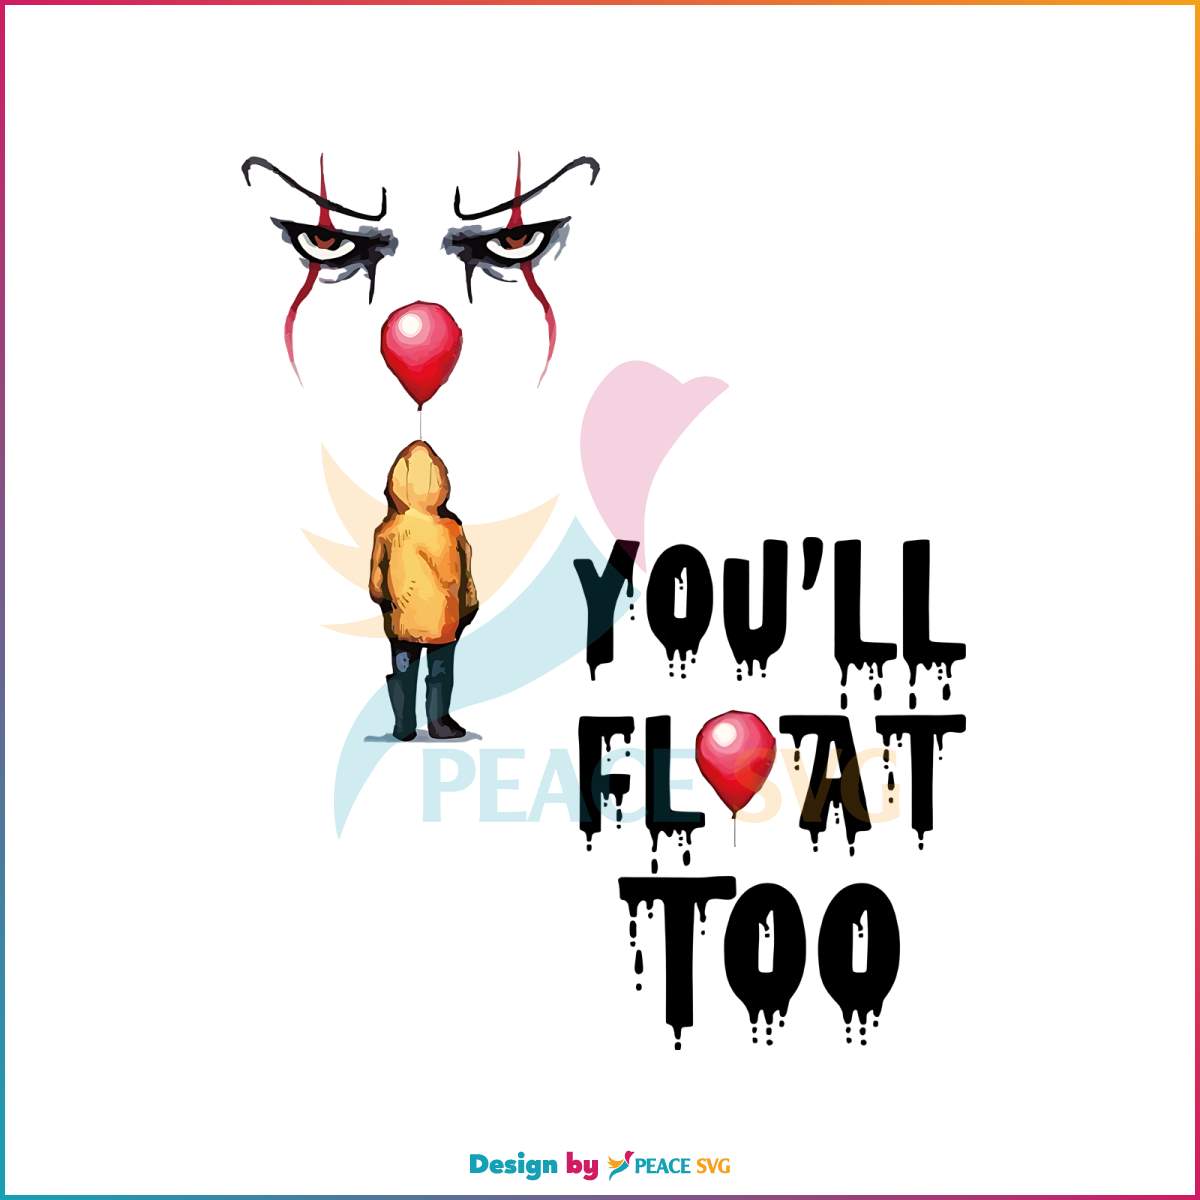 you-will-float-too-halloween-horror-character-png-download